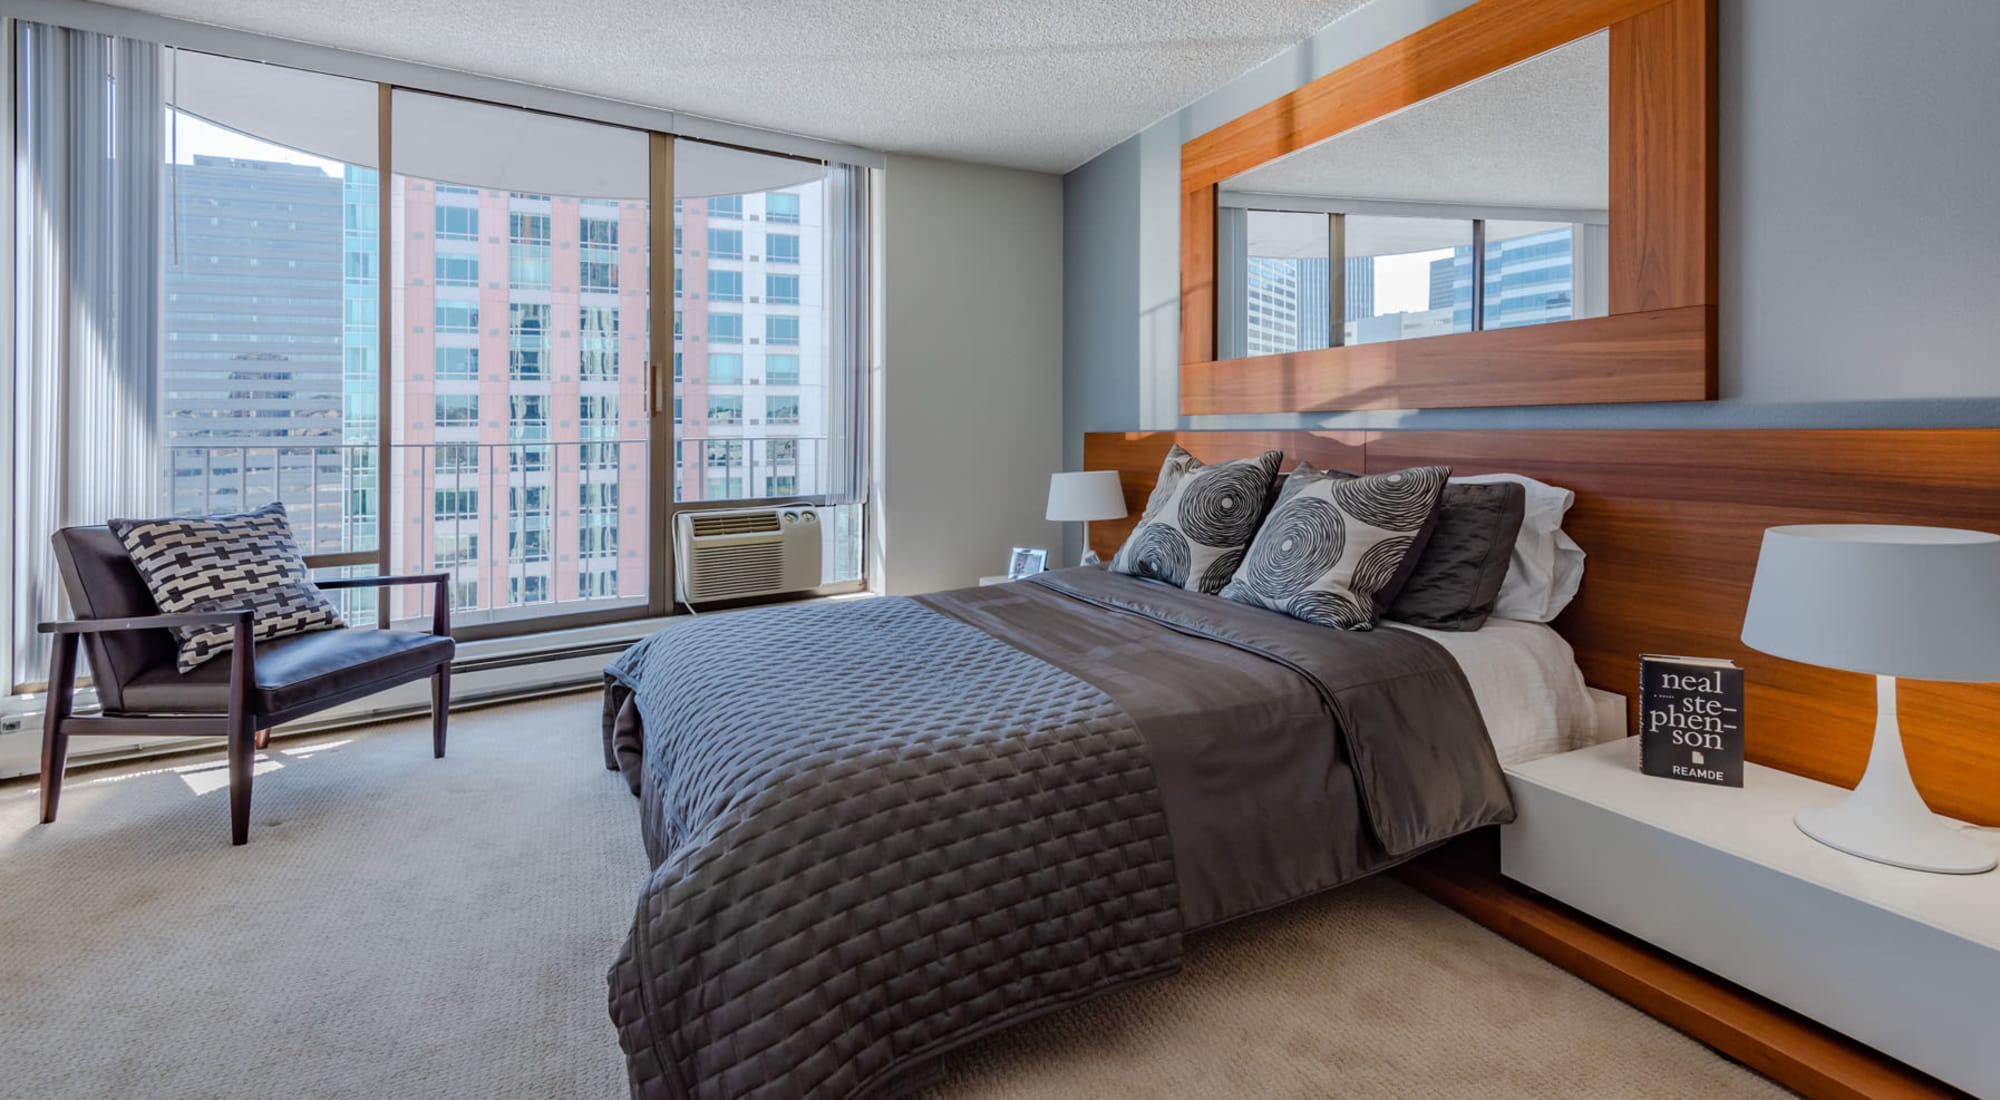 Apply to live at Tower 801 in Seattle, Washington